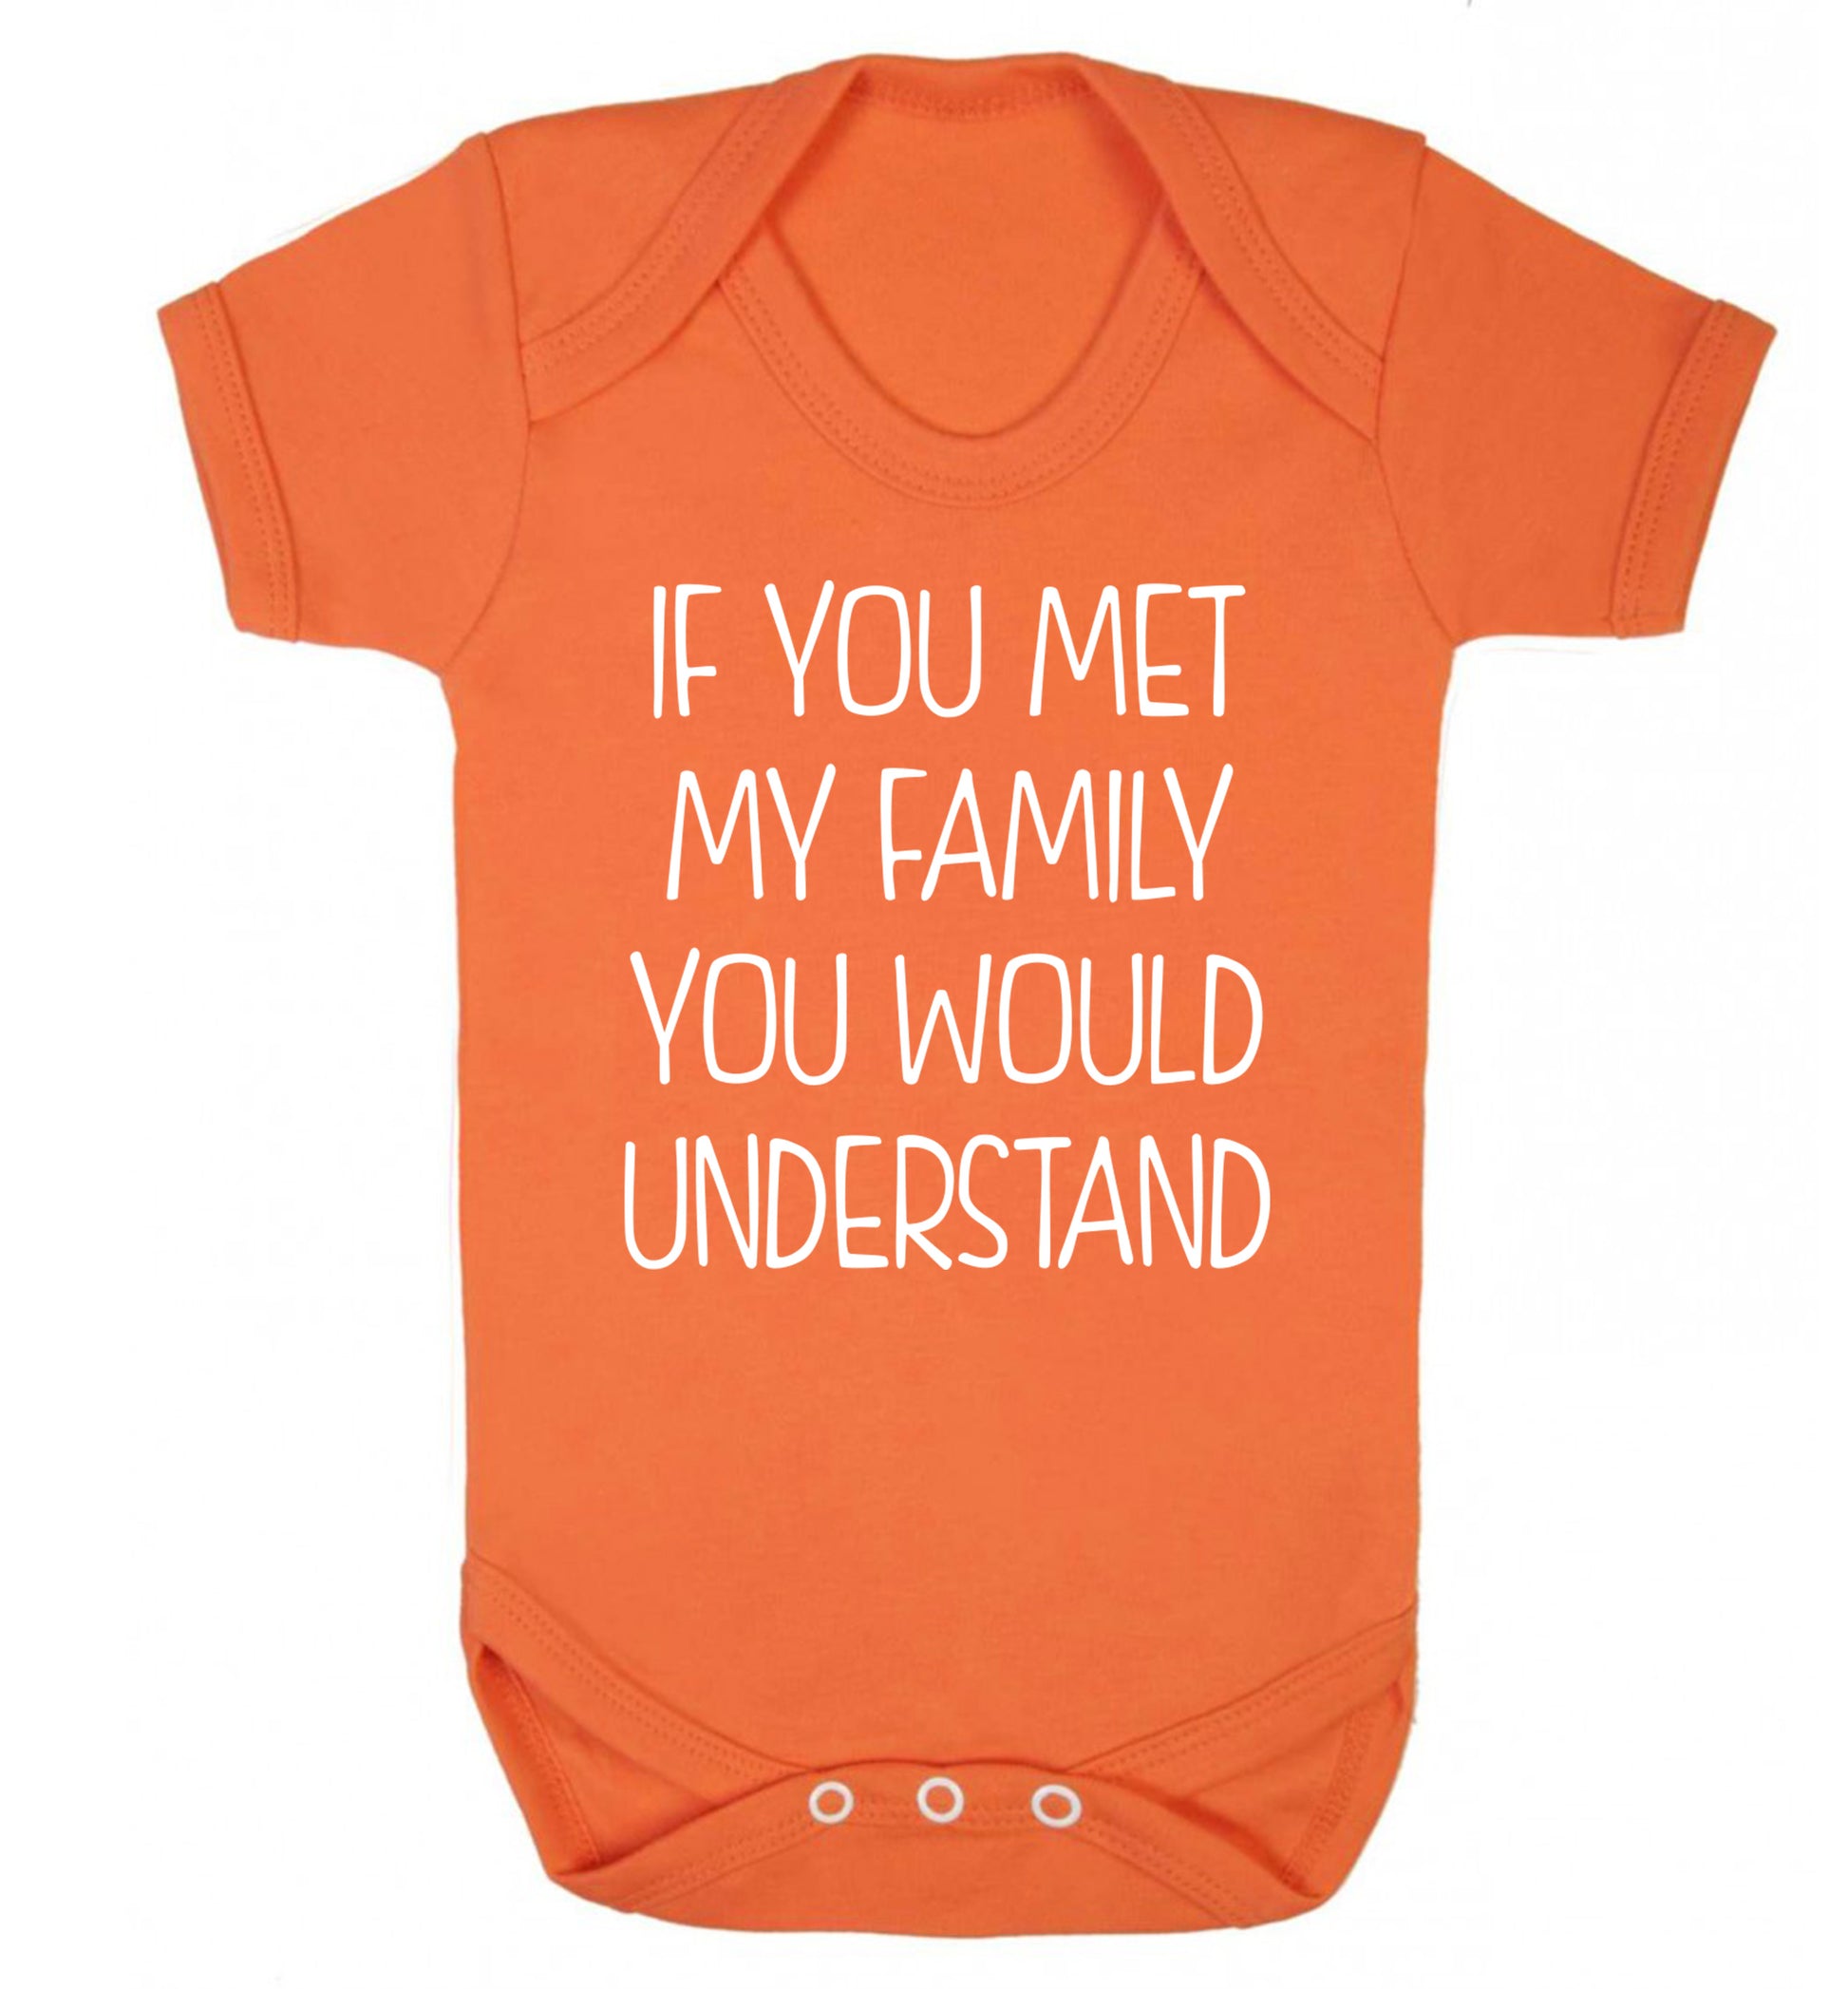 If you met my family you would understand Baby Vest orange 18-24 months